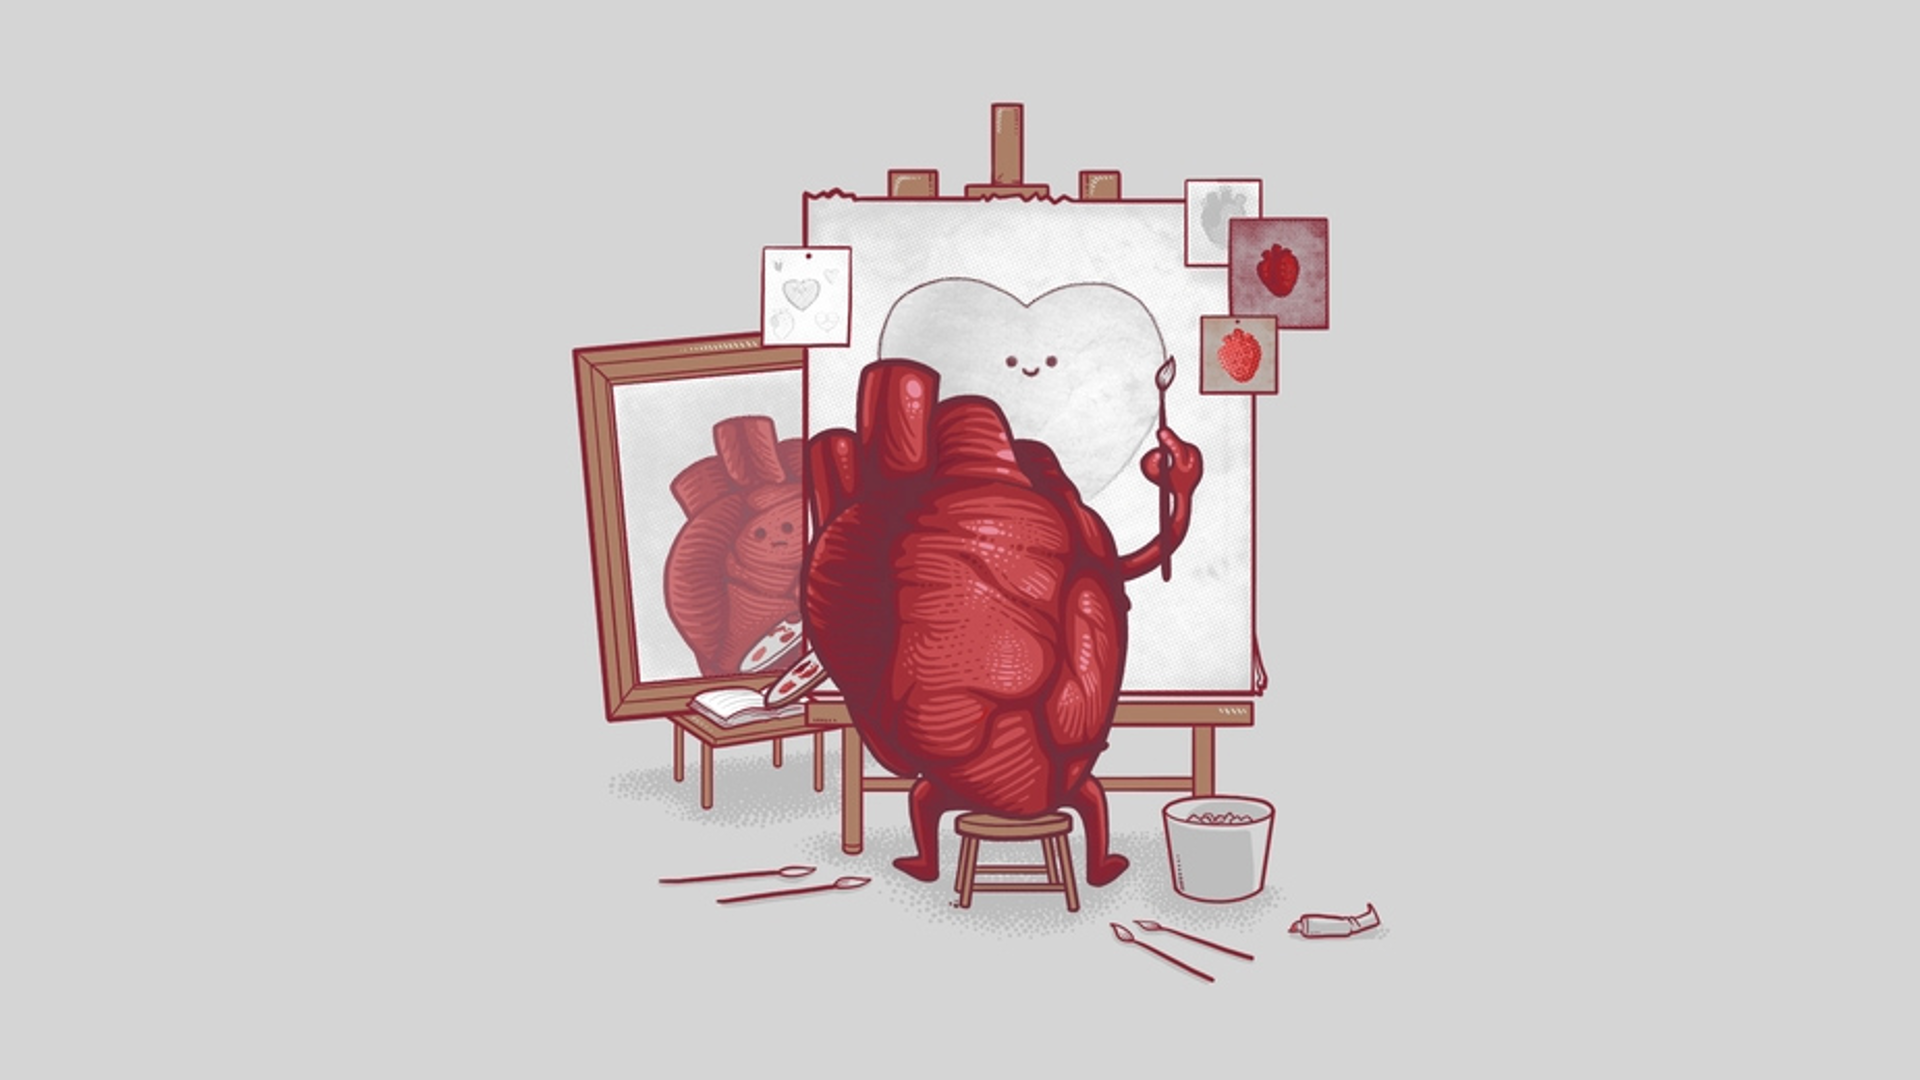 Human heart painting what it thinks it looks like